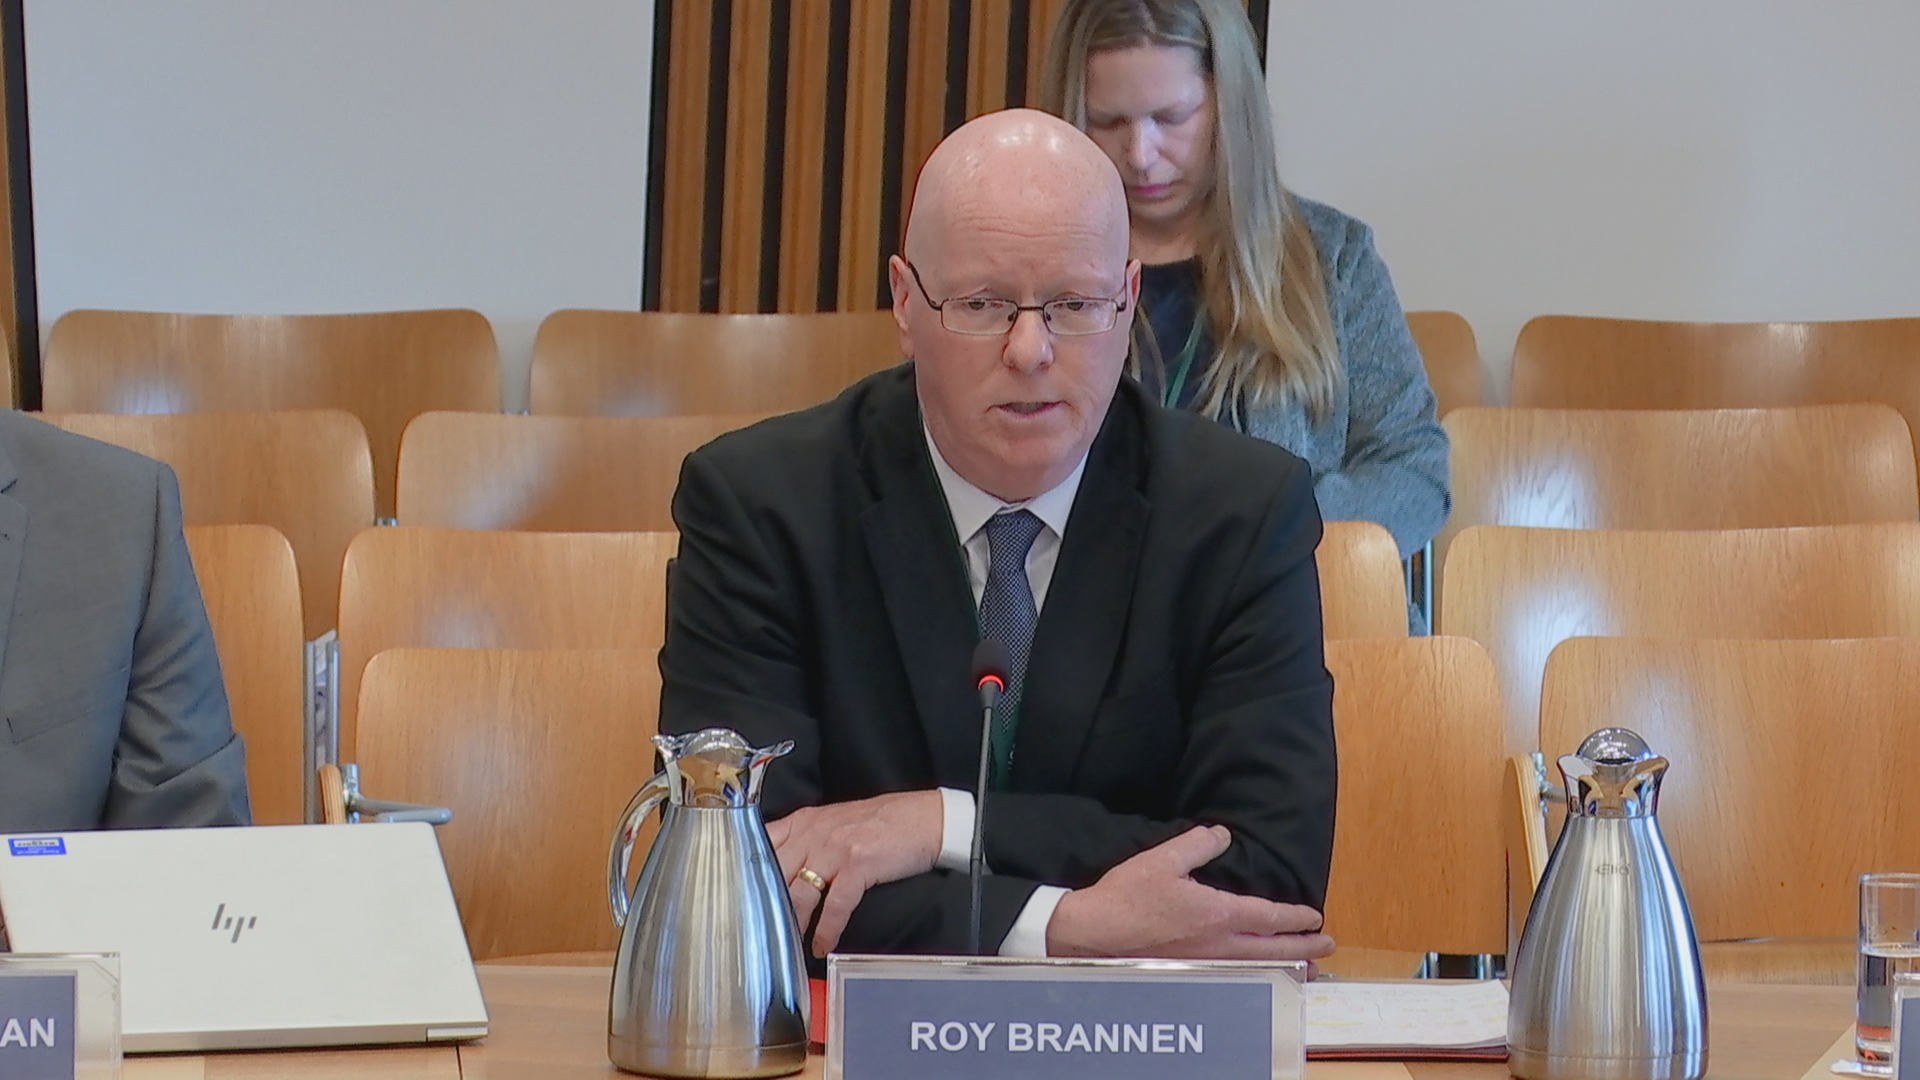 Roy Brannen gave evidence to MSPs on Holyrood's Public Audit Committee. (Scottish Parliament TV)